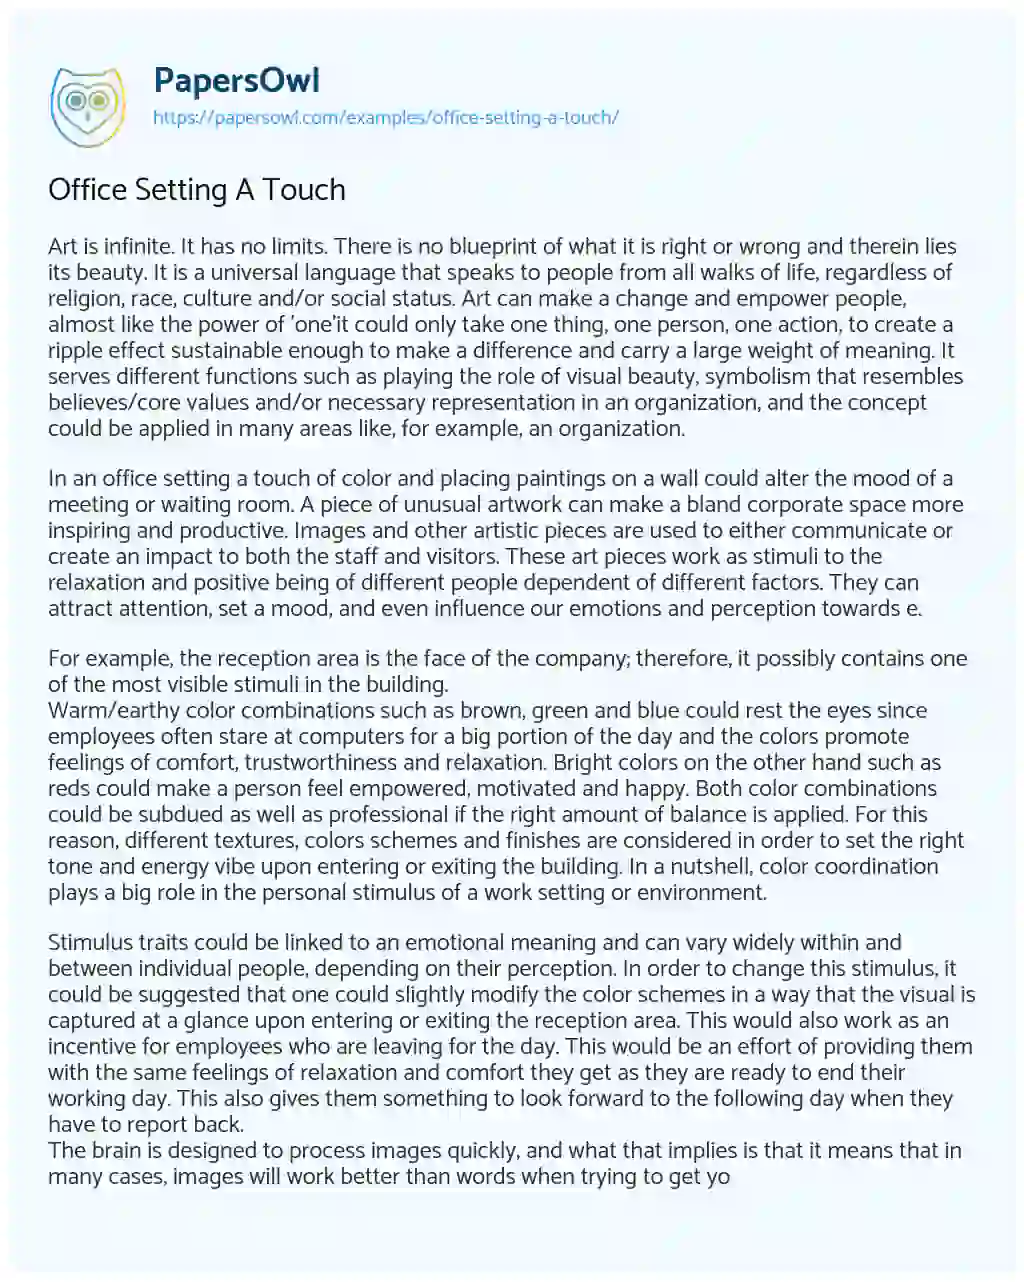 Office Setting a Touch essay